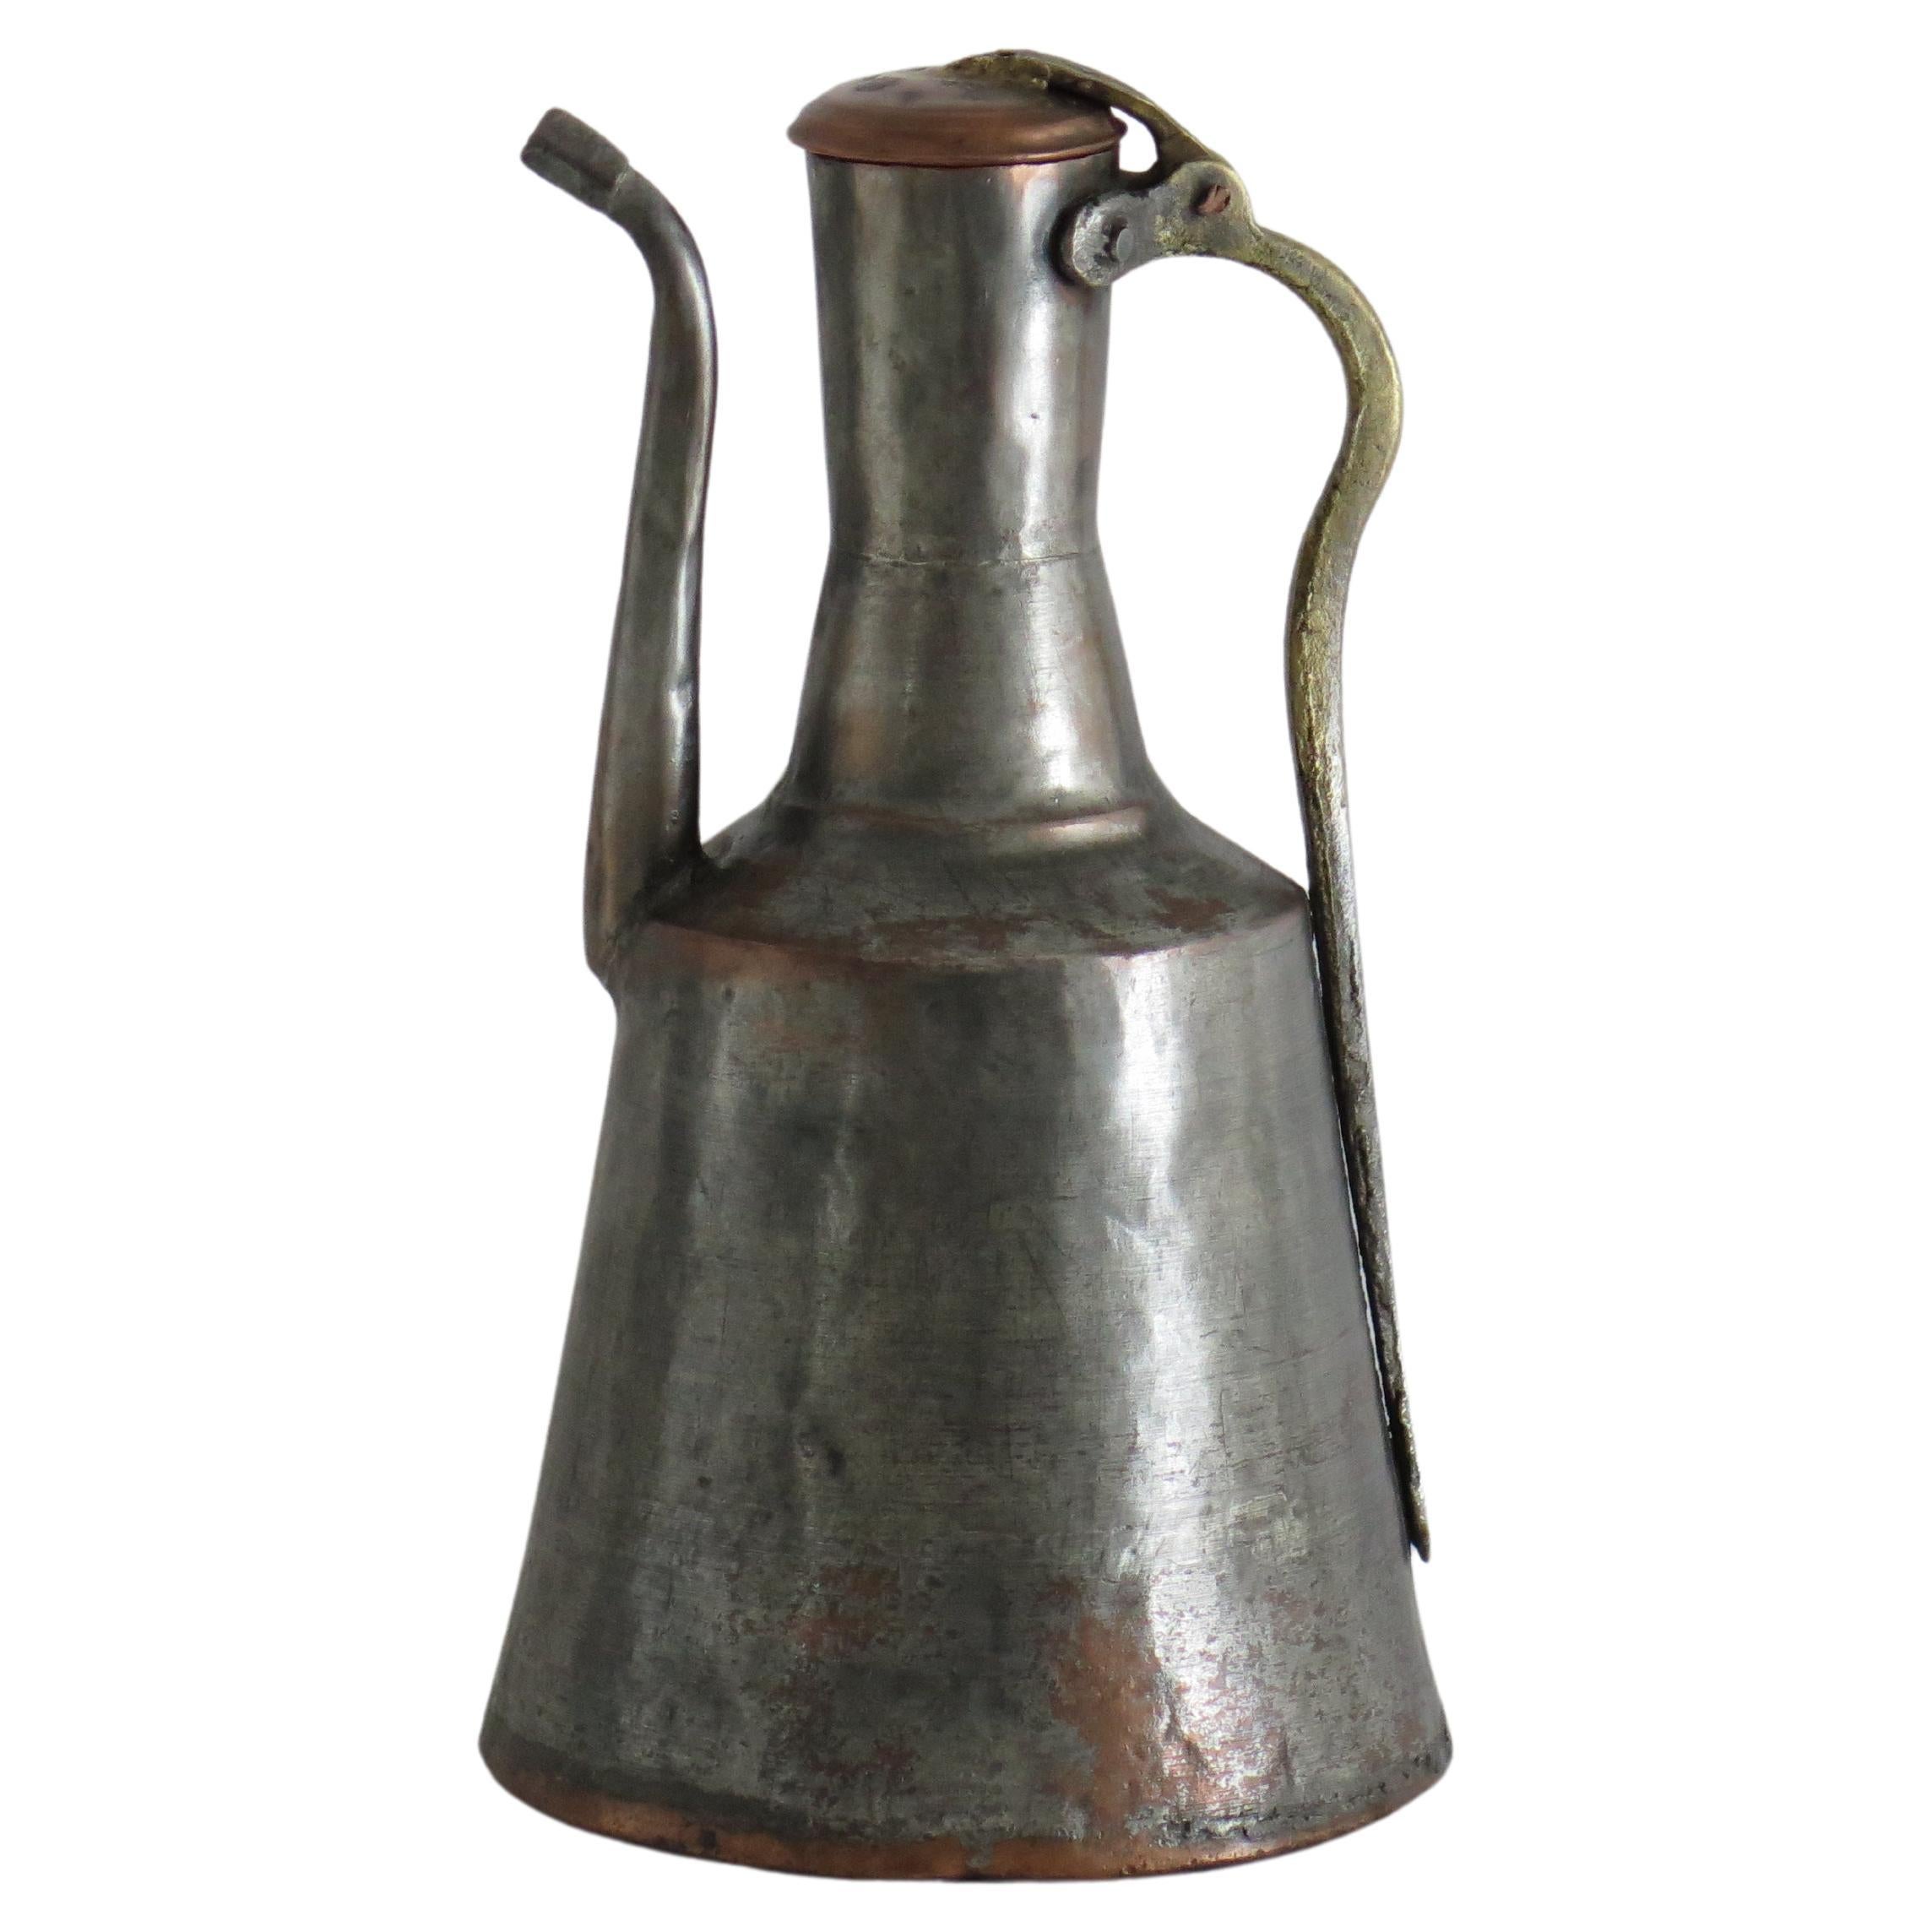 Ewer or Pitcher tinned Copper Turkish / Middle Eastern, Early 19th Century For Sale